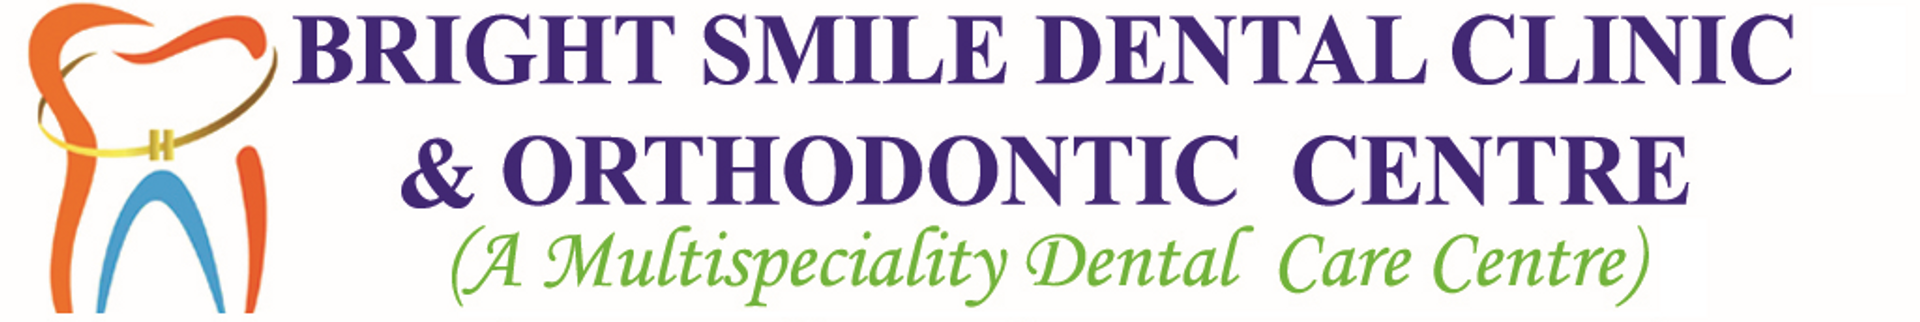 Bright Smile Dental Clinic Orthodontic and Implant Center|Veterinary|Medical Services